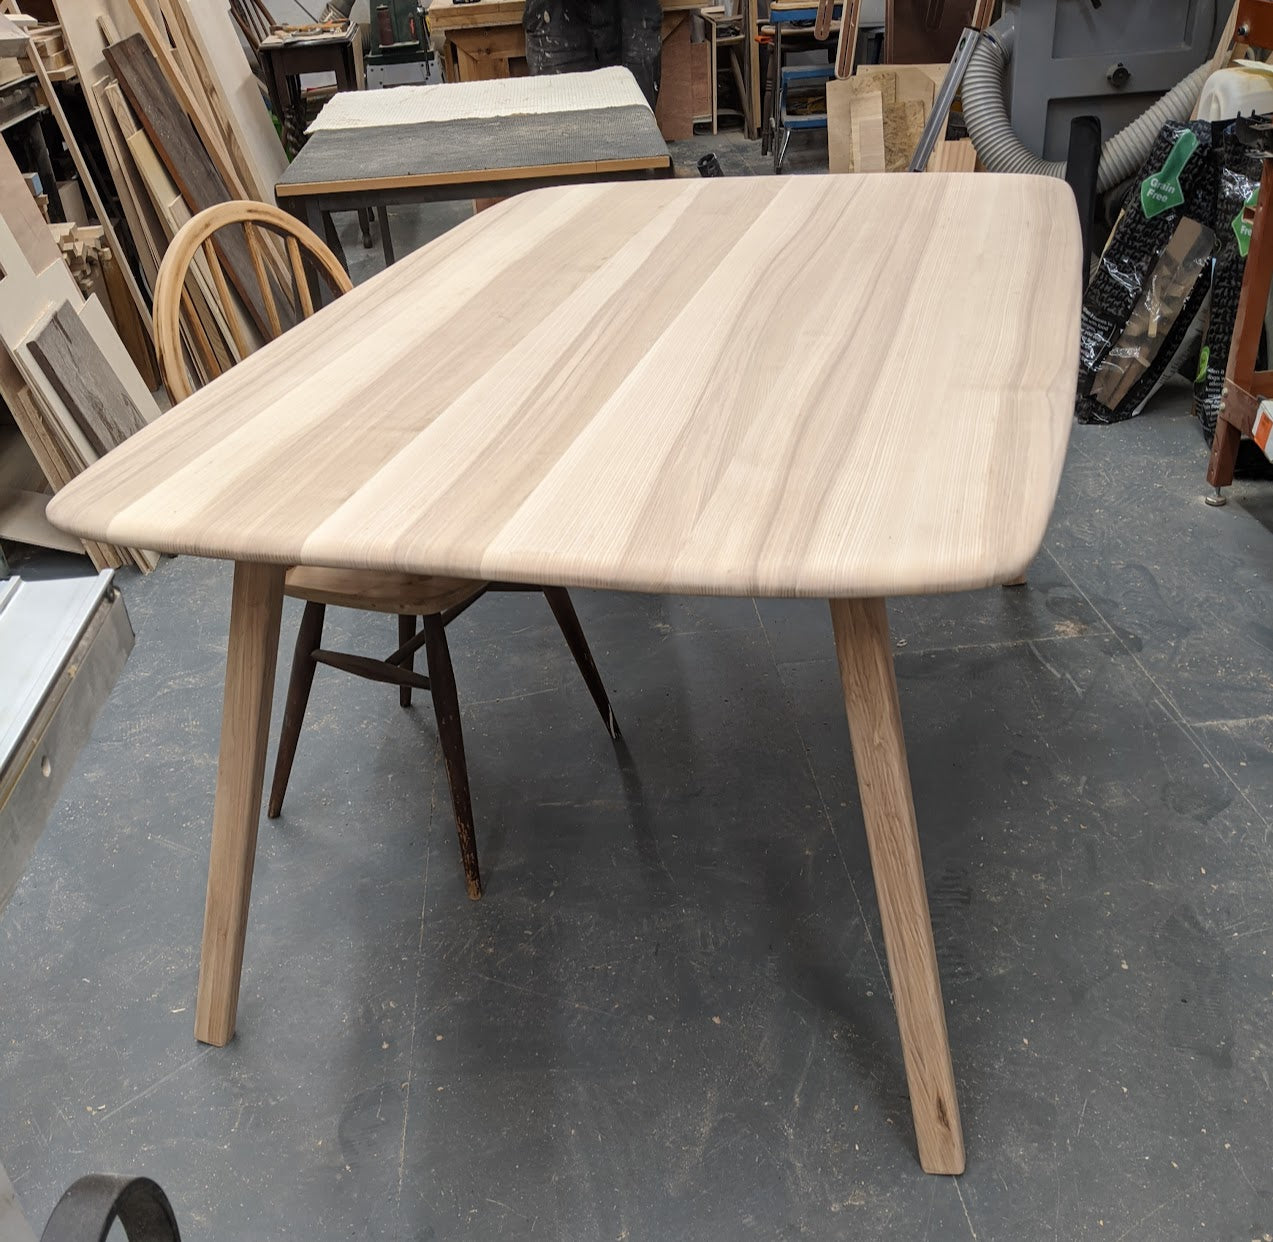 Bespoke Ash Table Bench and Restored Ercol Chair Set